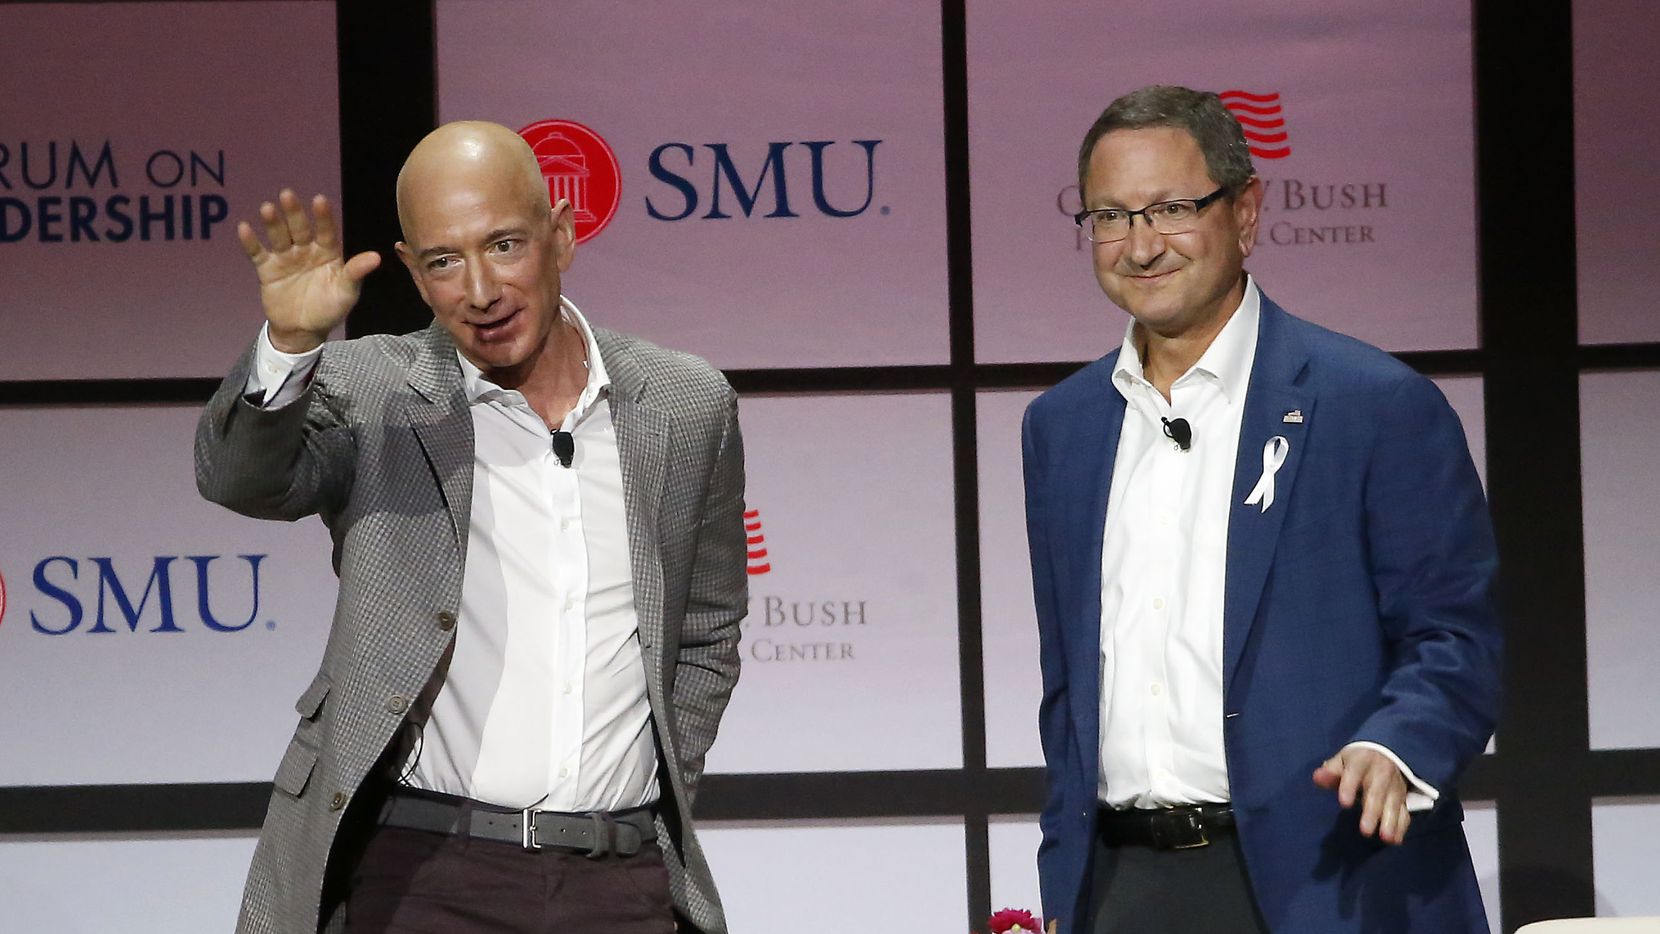 Jeff Bezos waved to the crowd before speaking with Ken Hersh, president and chief executive of the George W. Bush Presidential Center, at a 2018 leadership forum hosted in Dallas by the Bush Center.